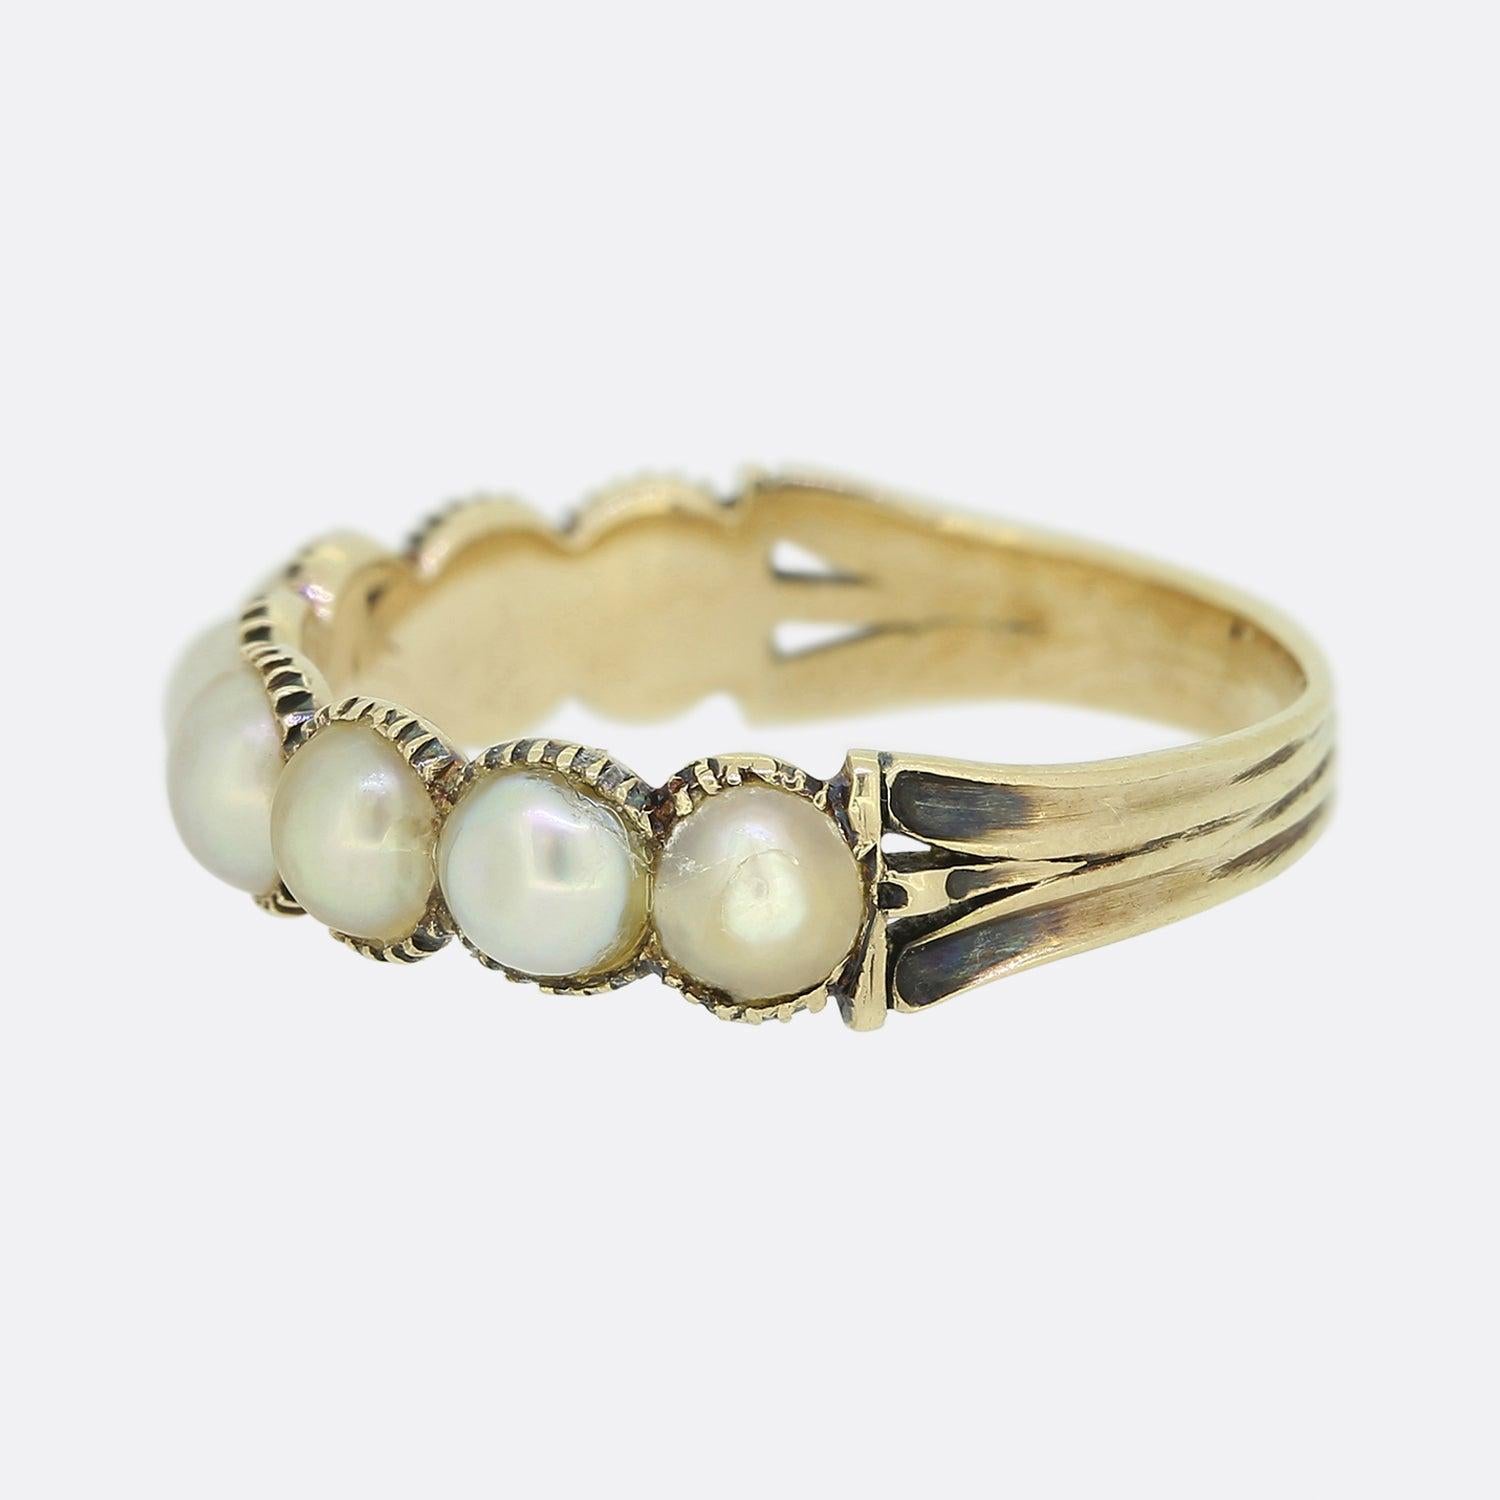 Here we have a pearl set ring from the early stages of the Victorian period. A split 18ct yellow gold band plays host to eight round natural pearls; all of which have been individually claw set in a single line formation across the face.